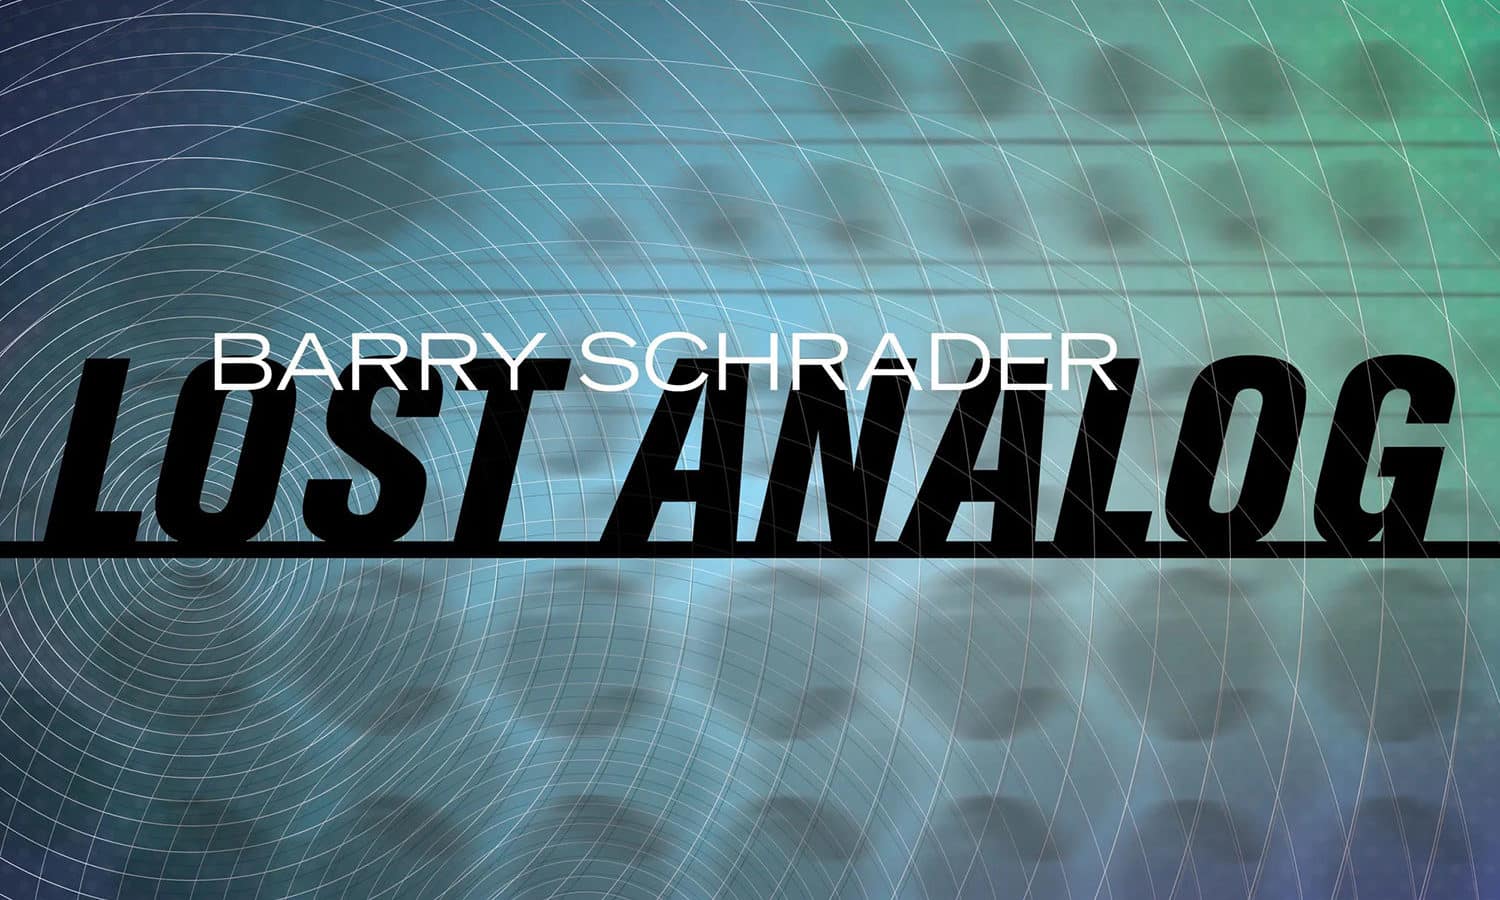 Graphic blue and green album cover with bold black text "Lost Analog" beneath smaller white text "Barry Schrader"